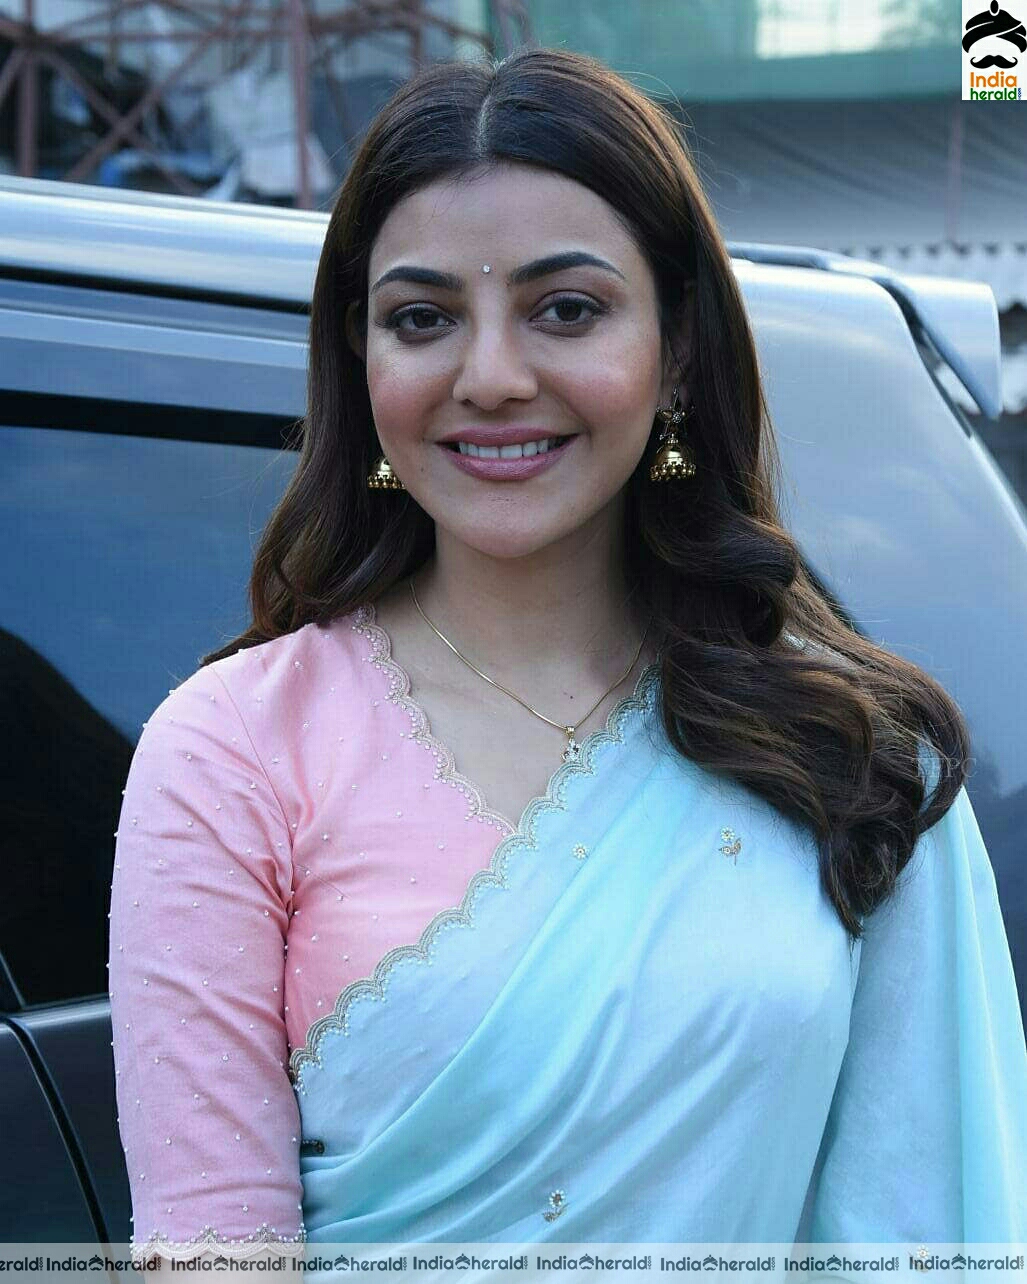 Kajal Aggarwal looking gorgeous like a Barbie doll in saree